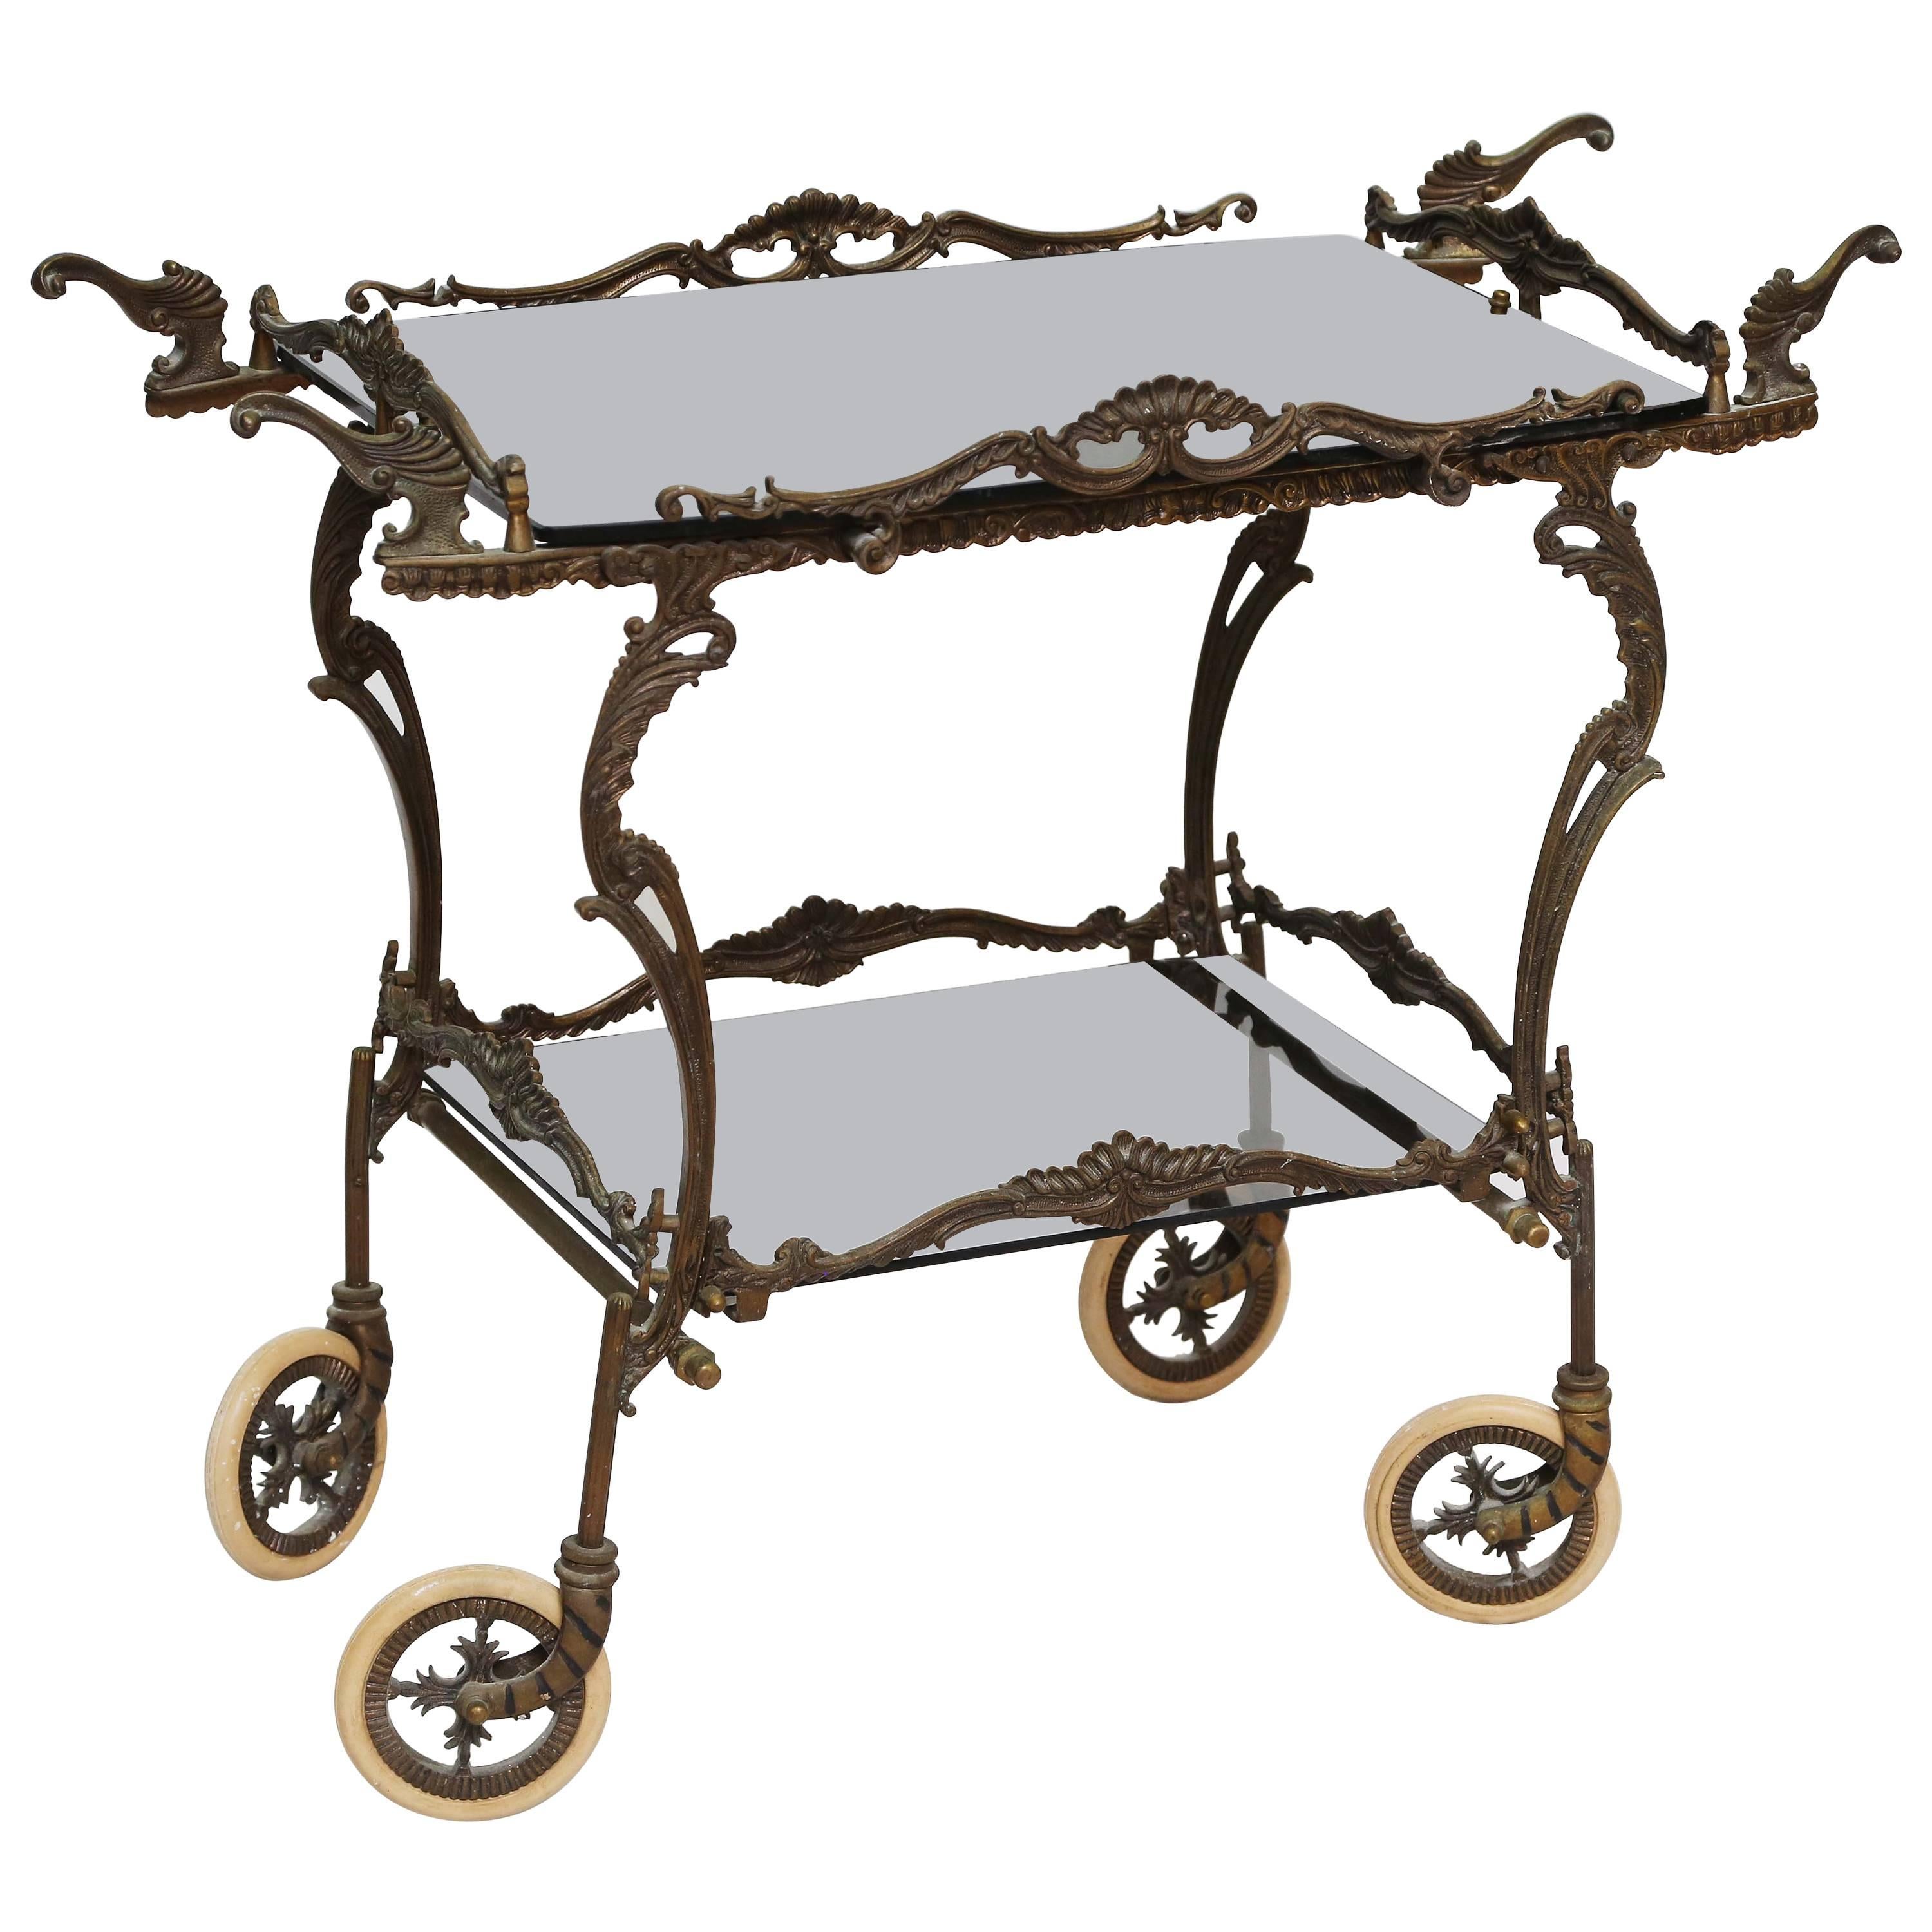 SALE! SALE!SALE! ONE OF ITS KIND BRONZE BARCART  never seen before